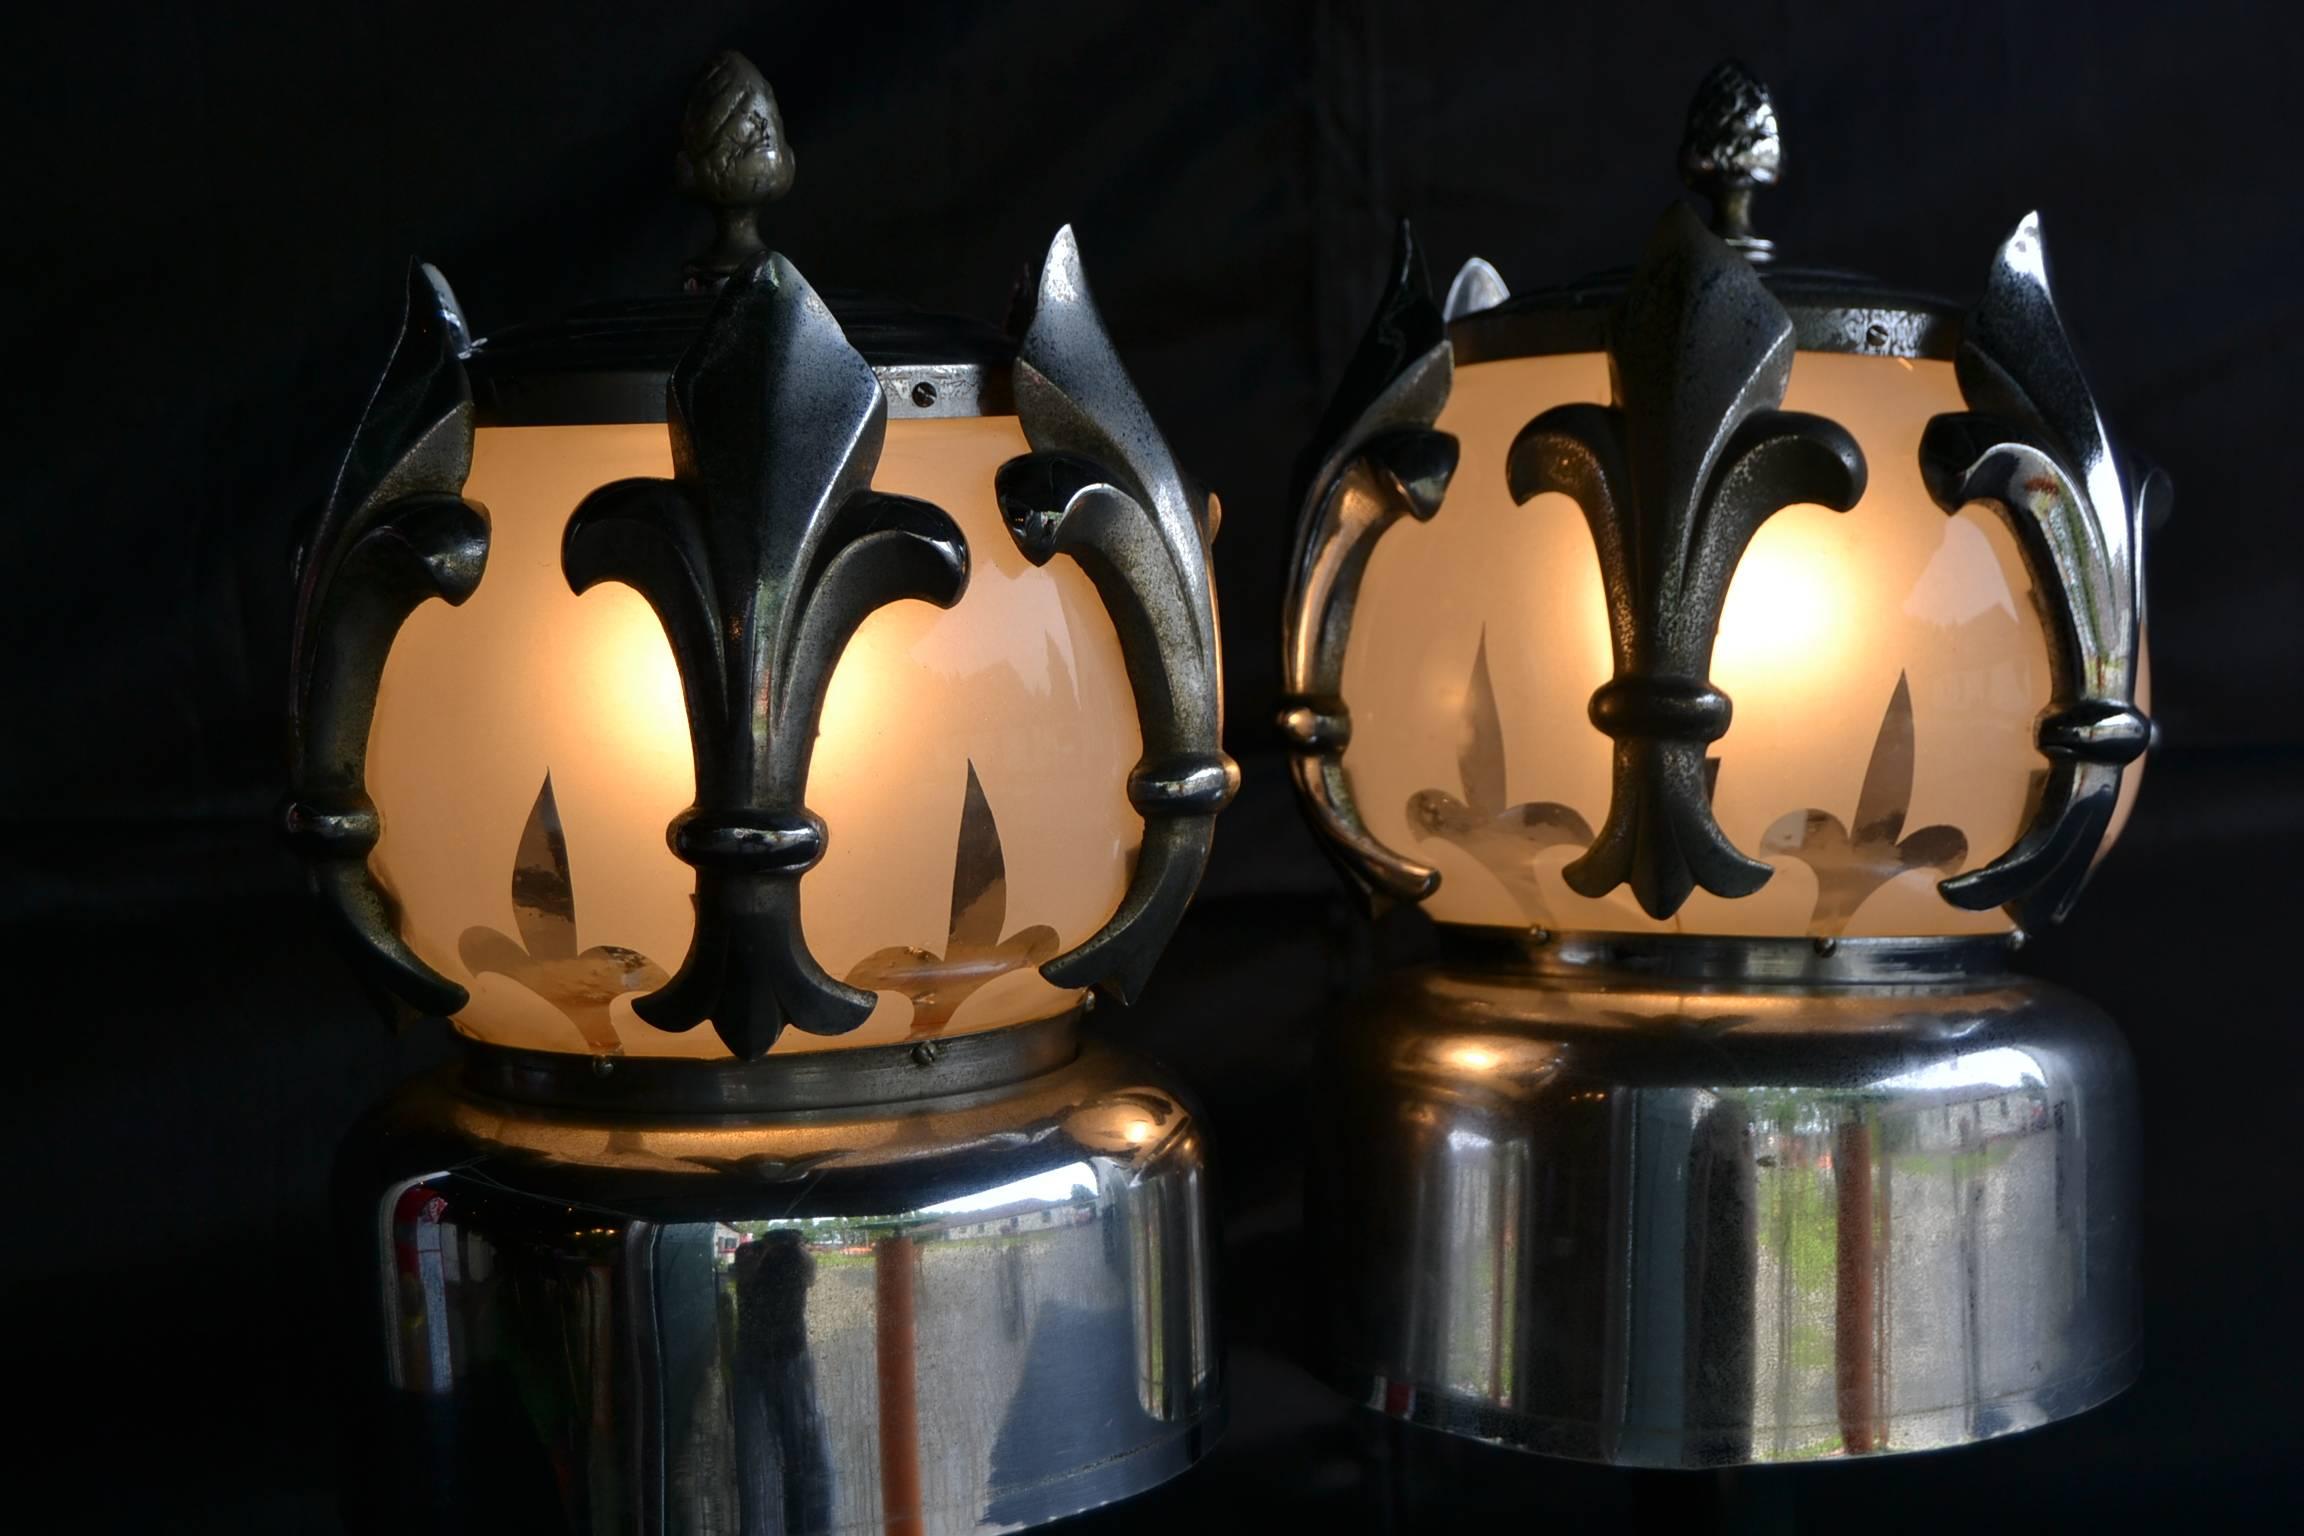 Chrome Four Art Deco Lamps from Hearse / Funeral Car